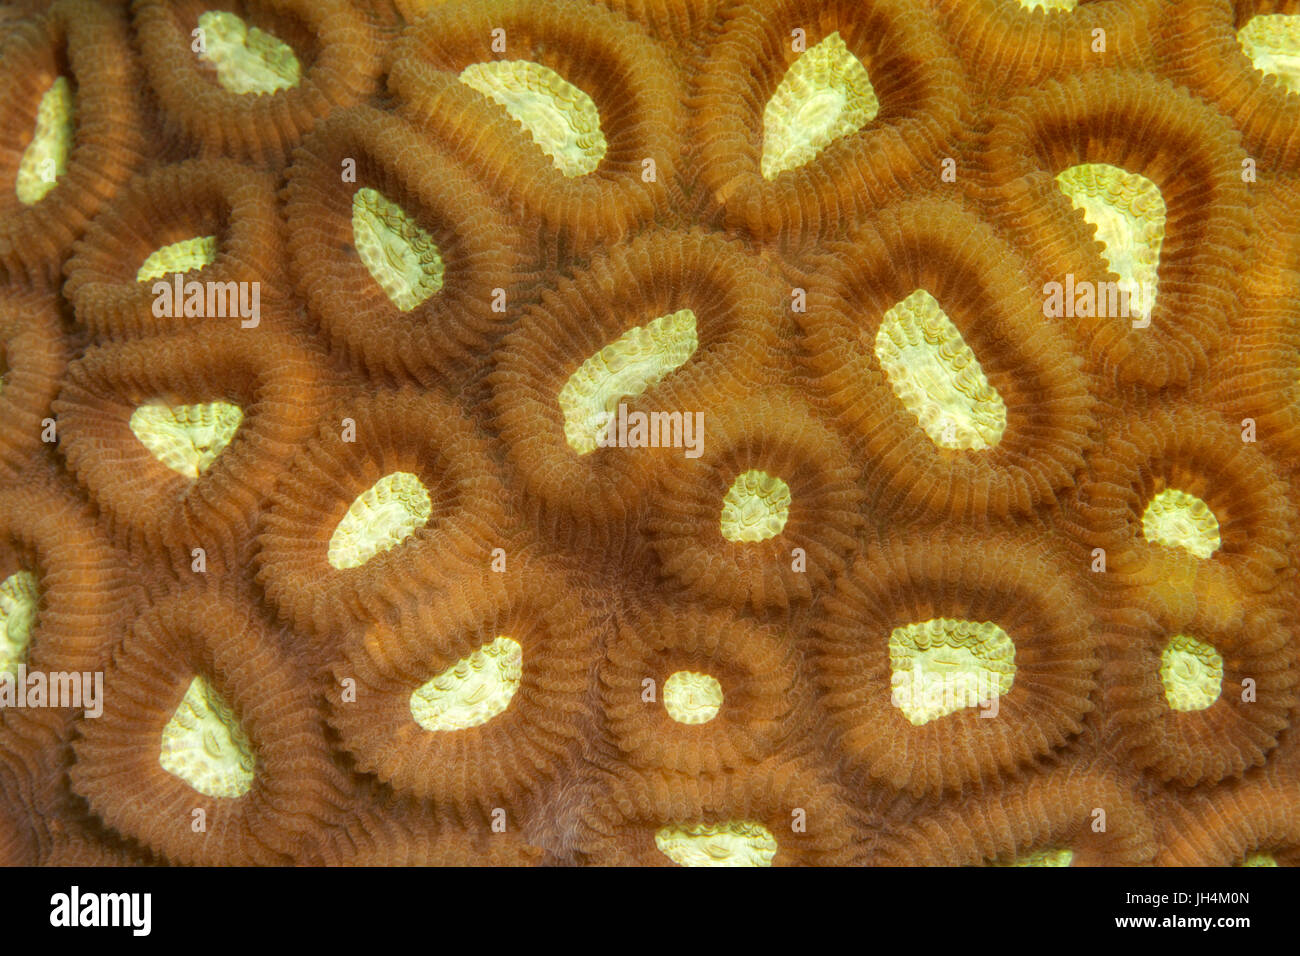 Favia stony coral (Favia sp.) with retracted polyps, Palawan, Mimaropa, Sulu Lake, Pacific Ocean, Philippines Stock Photo